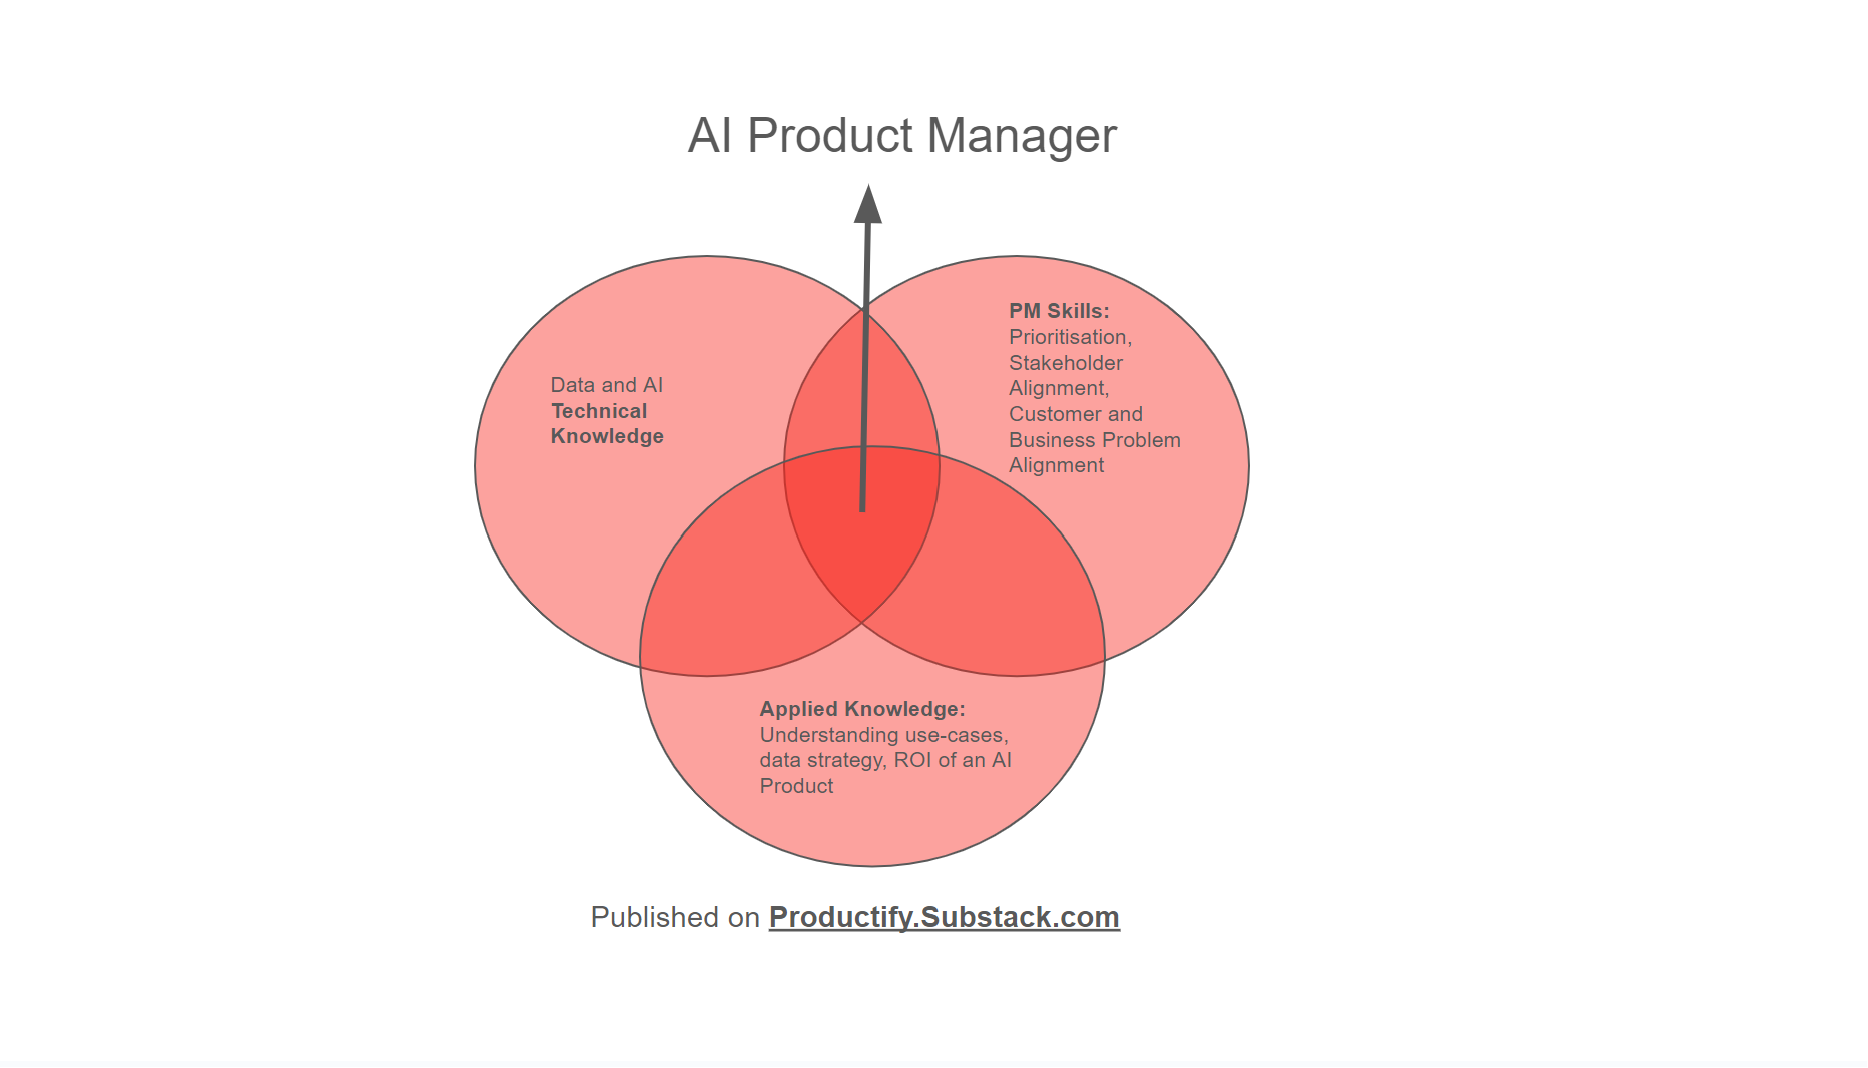 How to become an AI Product Manager?